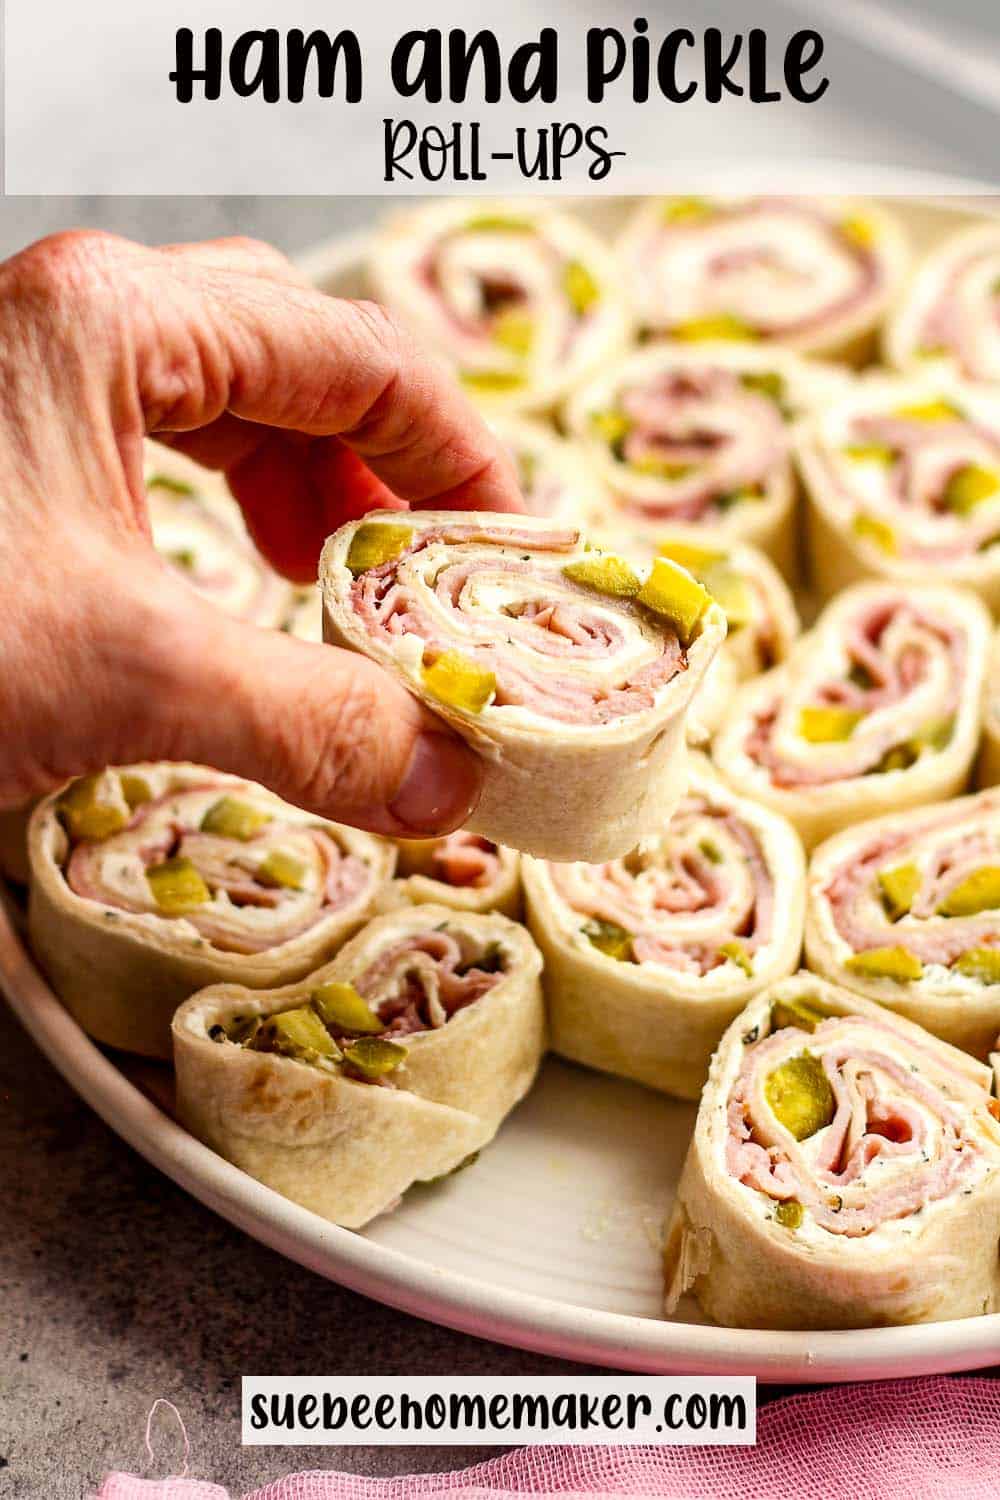 A hand holding a ham and pickle rollup over a plate of them.